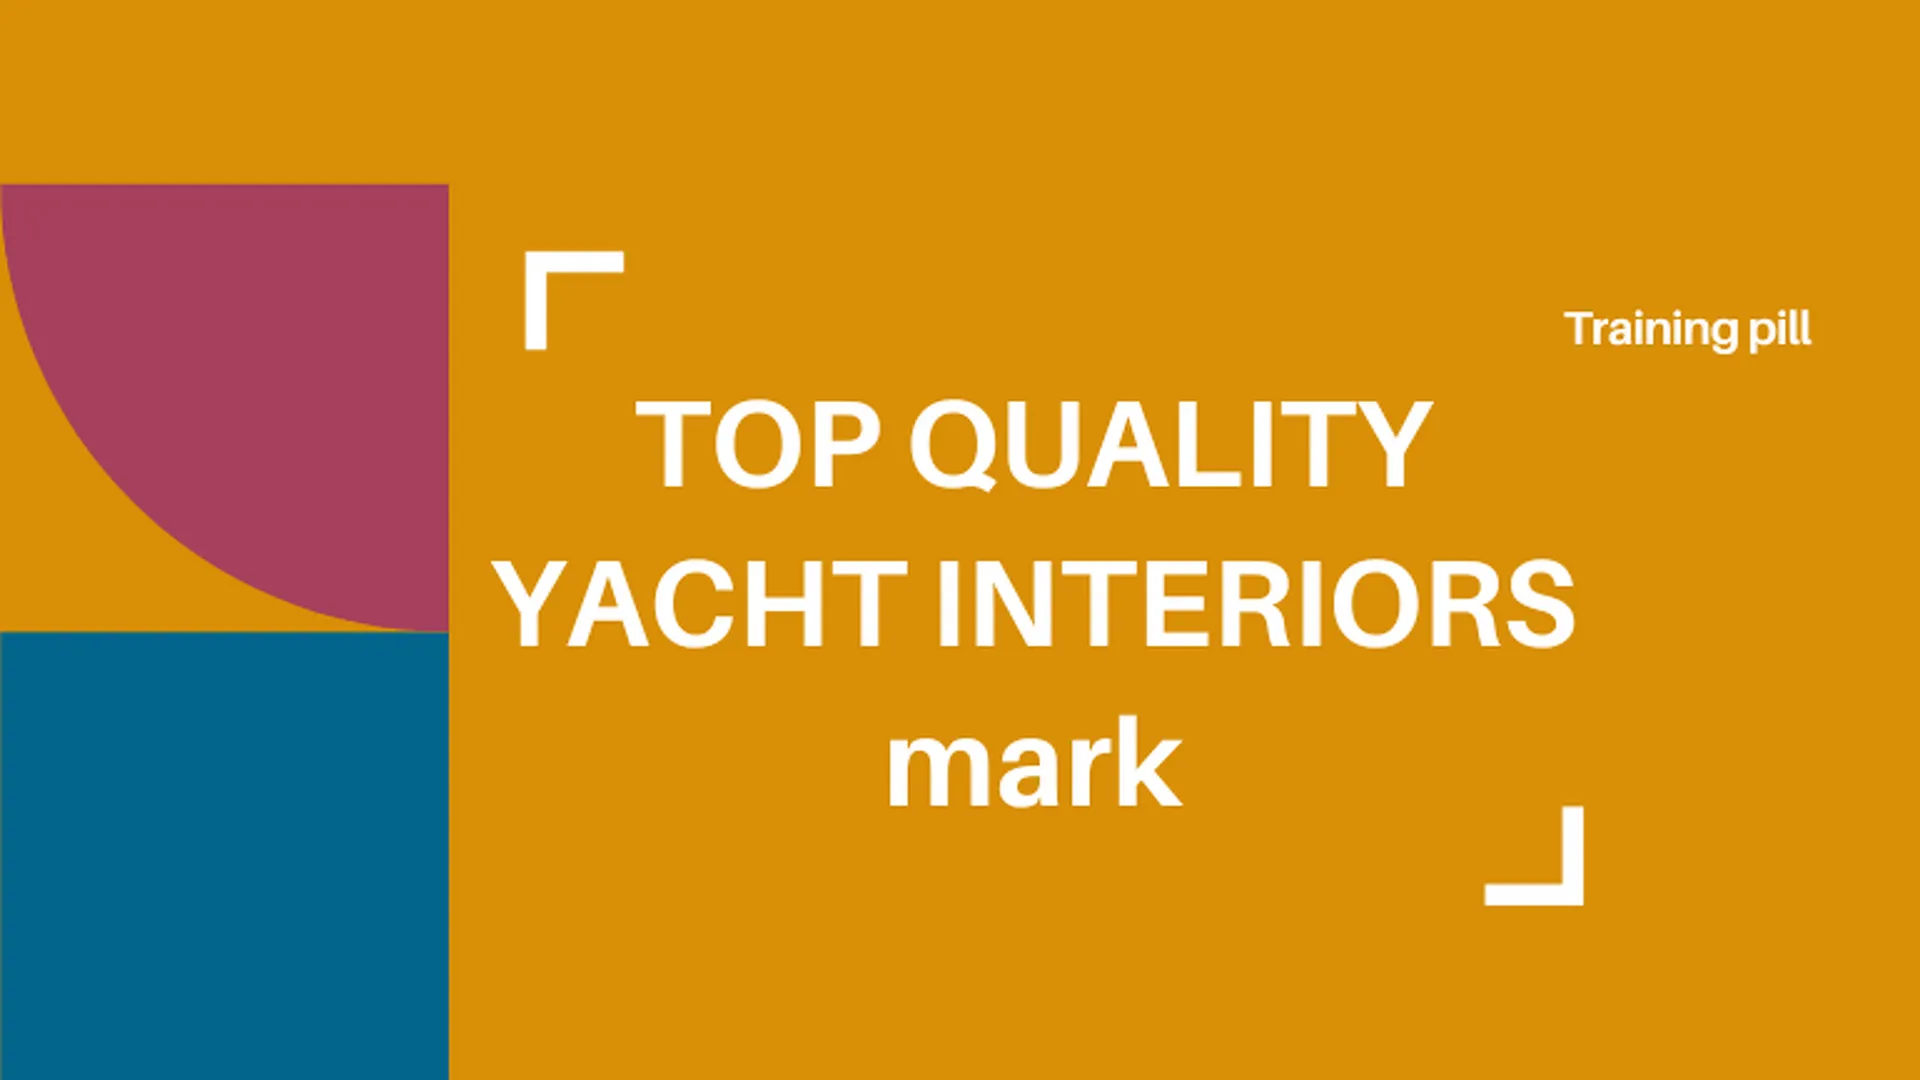 TOP QUALITY YACHT INTERIORS mark